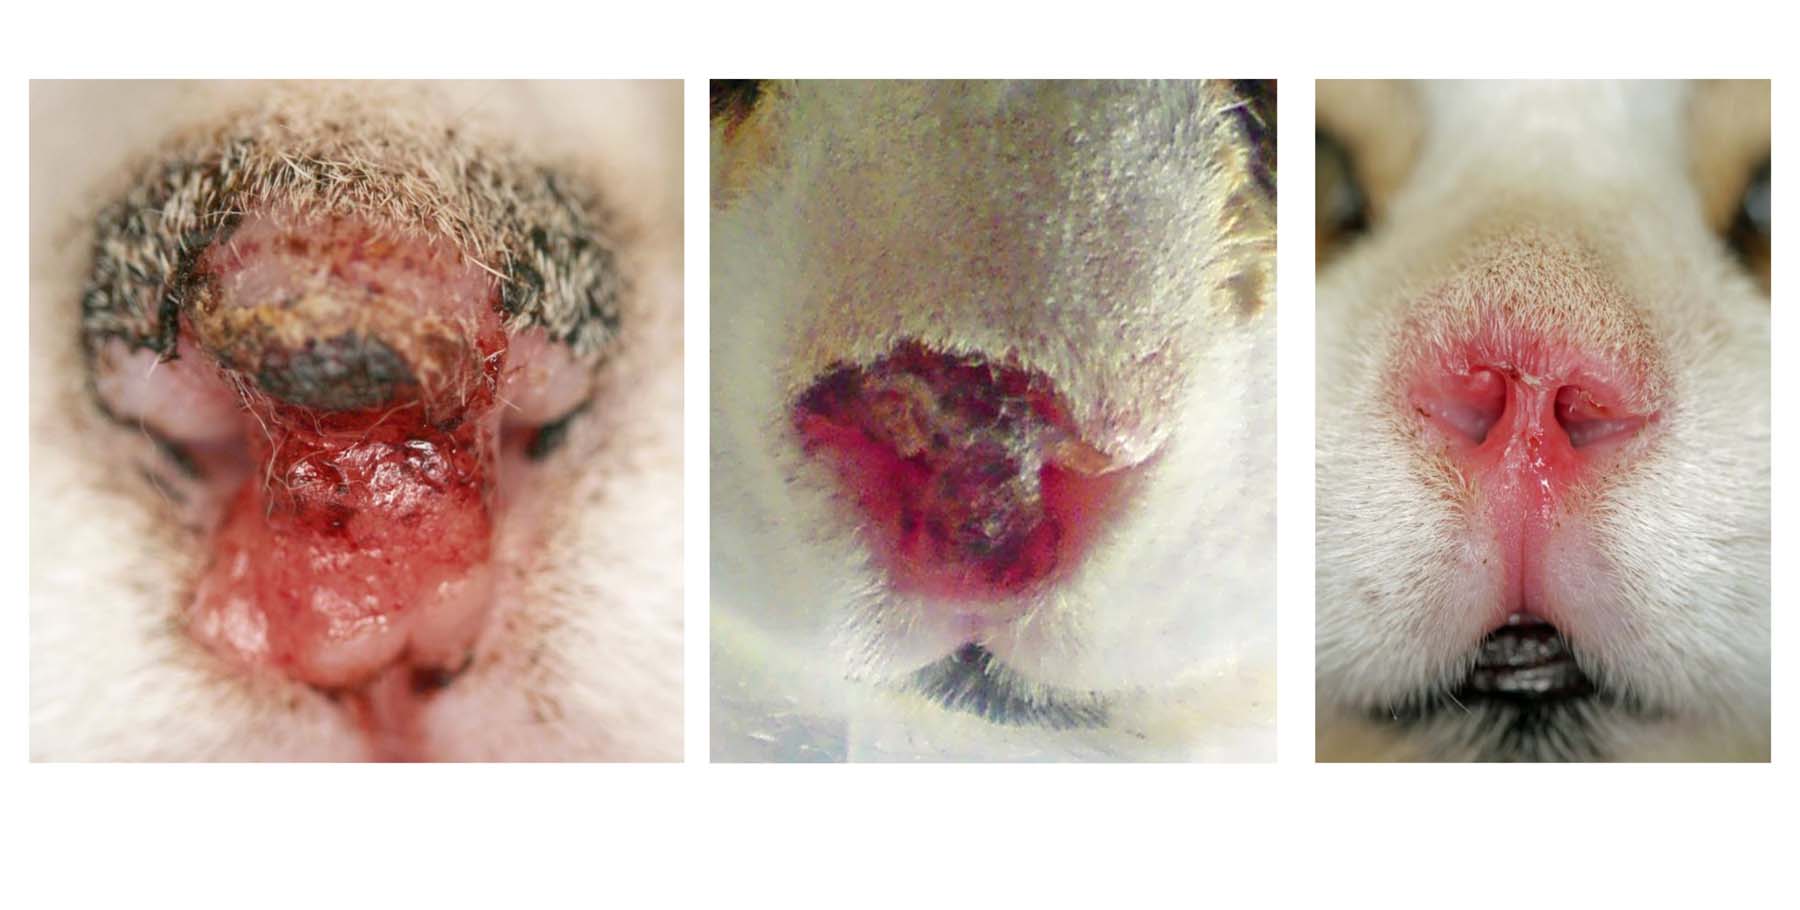 Feline Nasal Squamous Cell Carcinoma: Pre- & Post-curative Surgery, then 4 weeks later